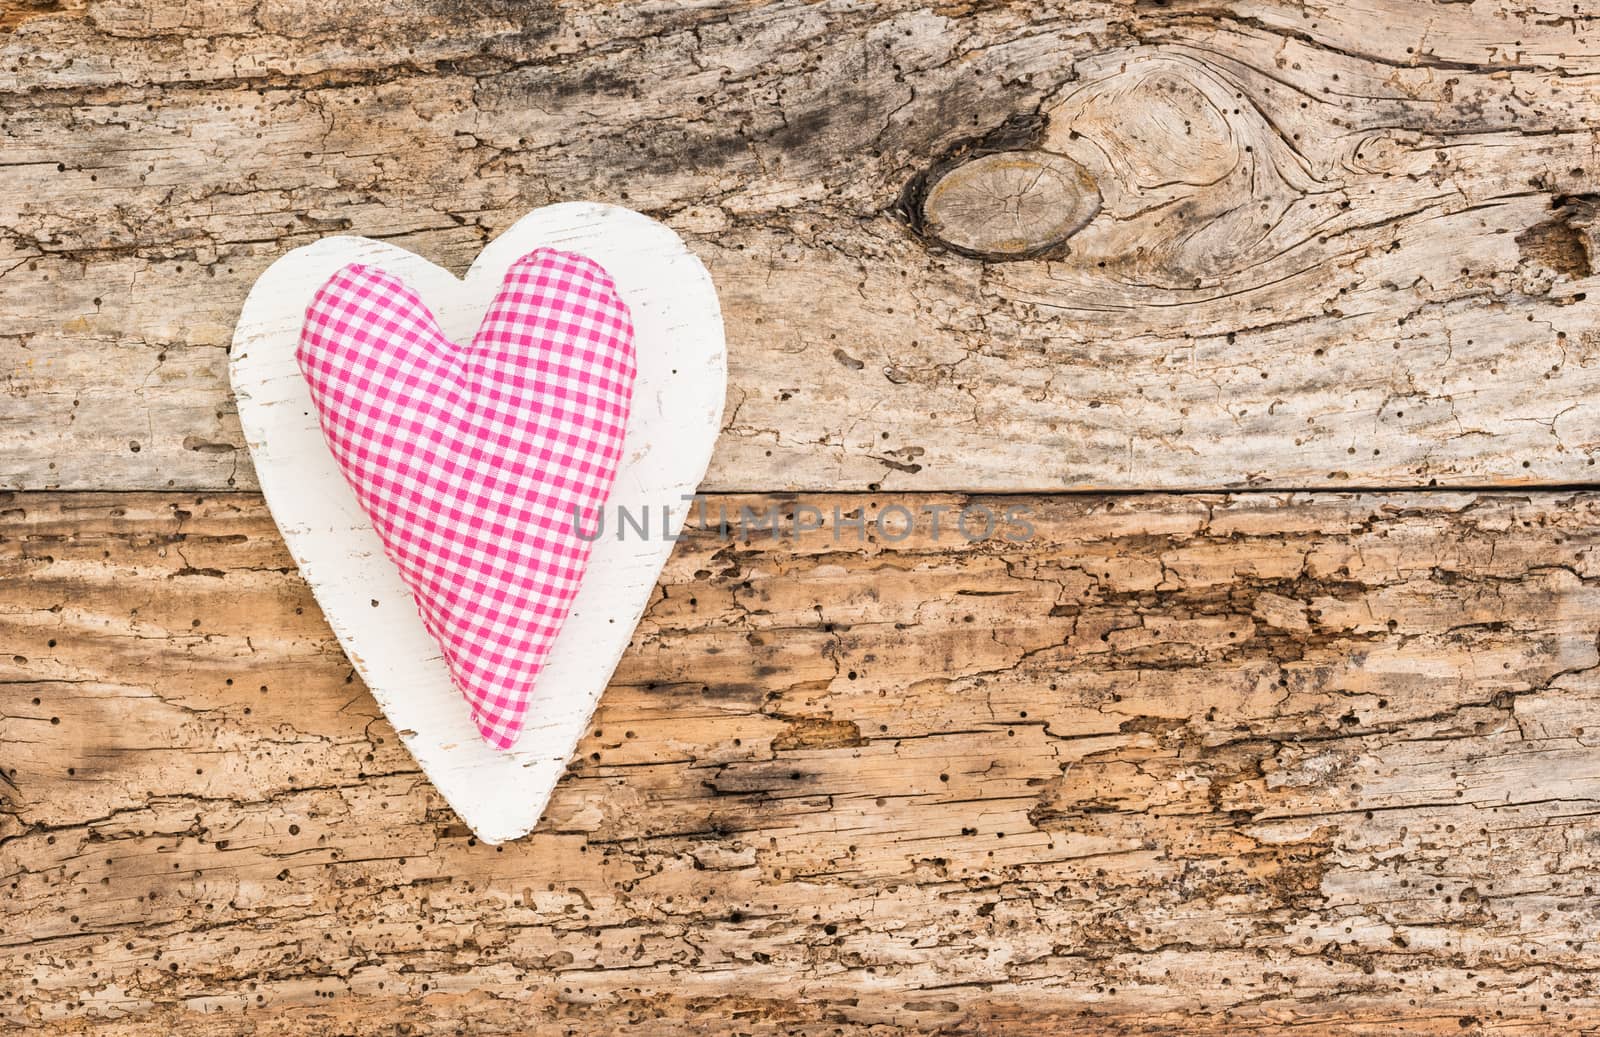 Romantic pink heart on rustic old wooden background for Valentine card with copy space

